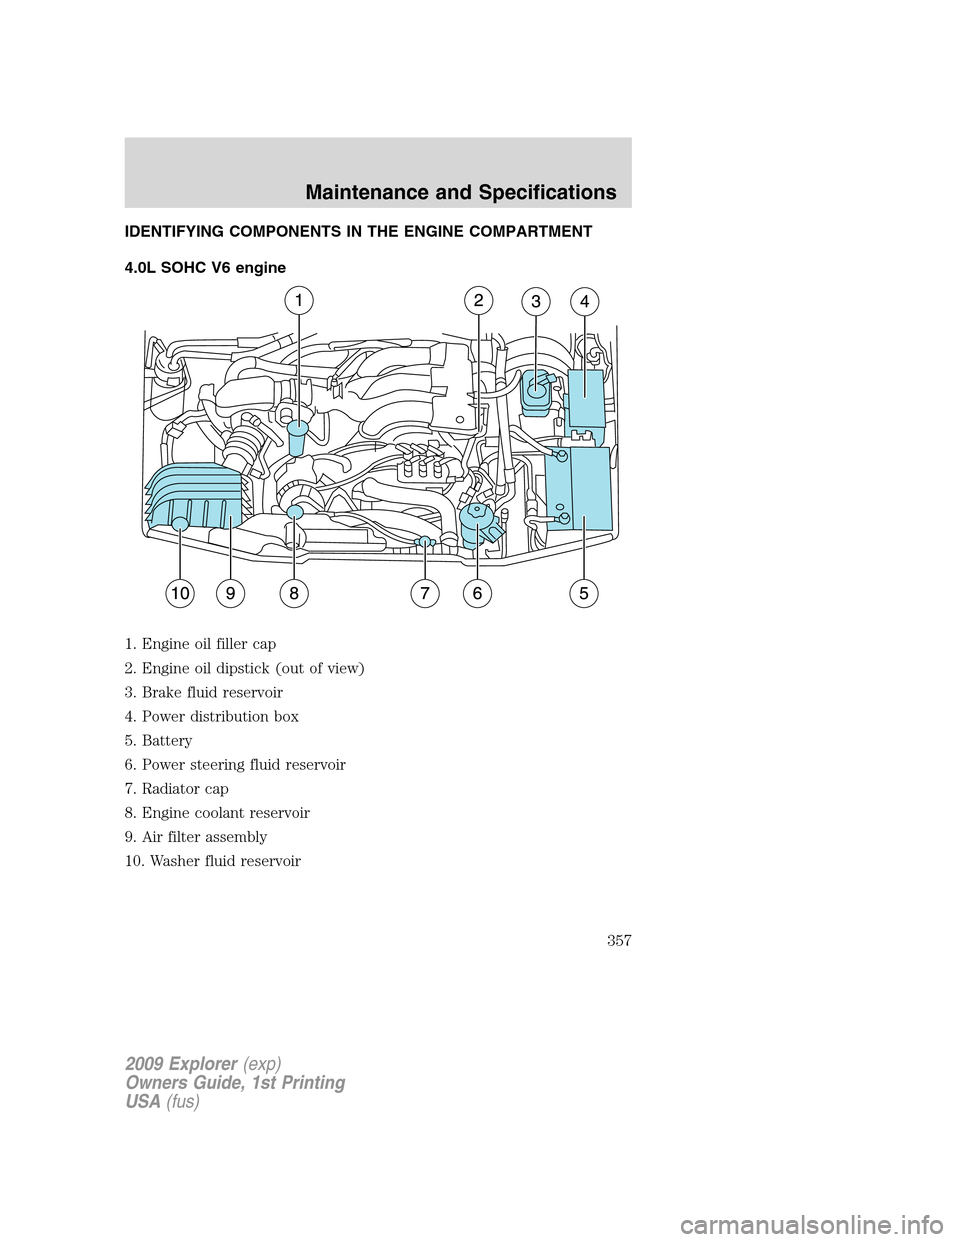 FORD EXPLORER 2009 4.G User Guide IDENTIFYING COMPONENTS IN THE ENGINE COMPARTMENT
4.0L SOHC V6 engine
1. Engine oil filler cap
2. Engine oil dipstick (out of view)
3. Brake fluid reservoir
4. Power distribution box
5. Battery
6. Powe